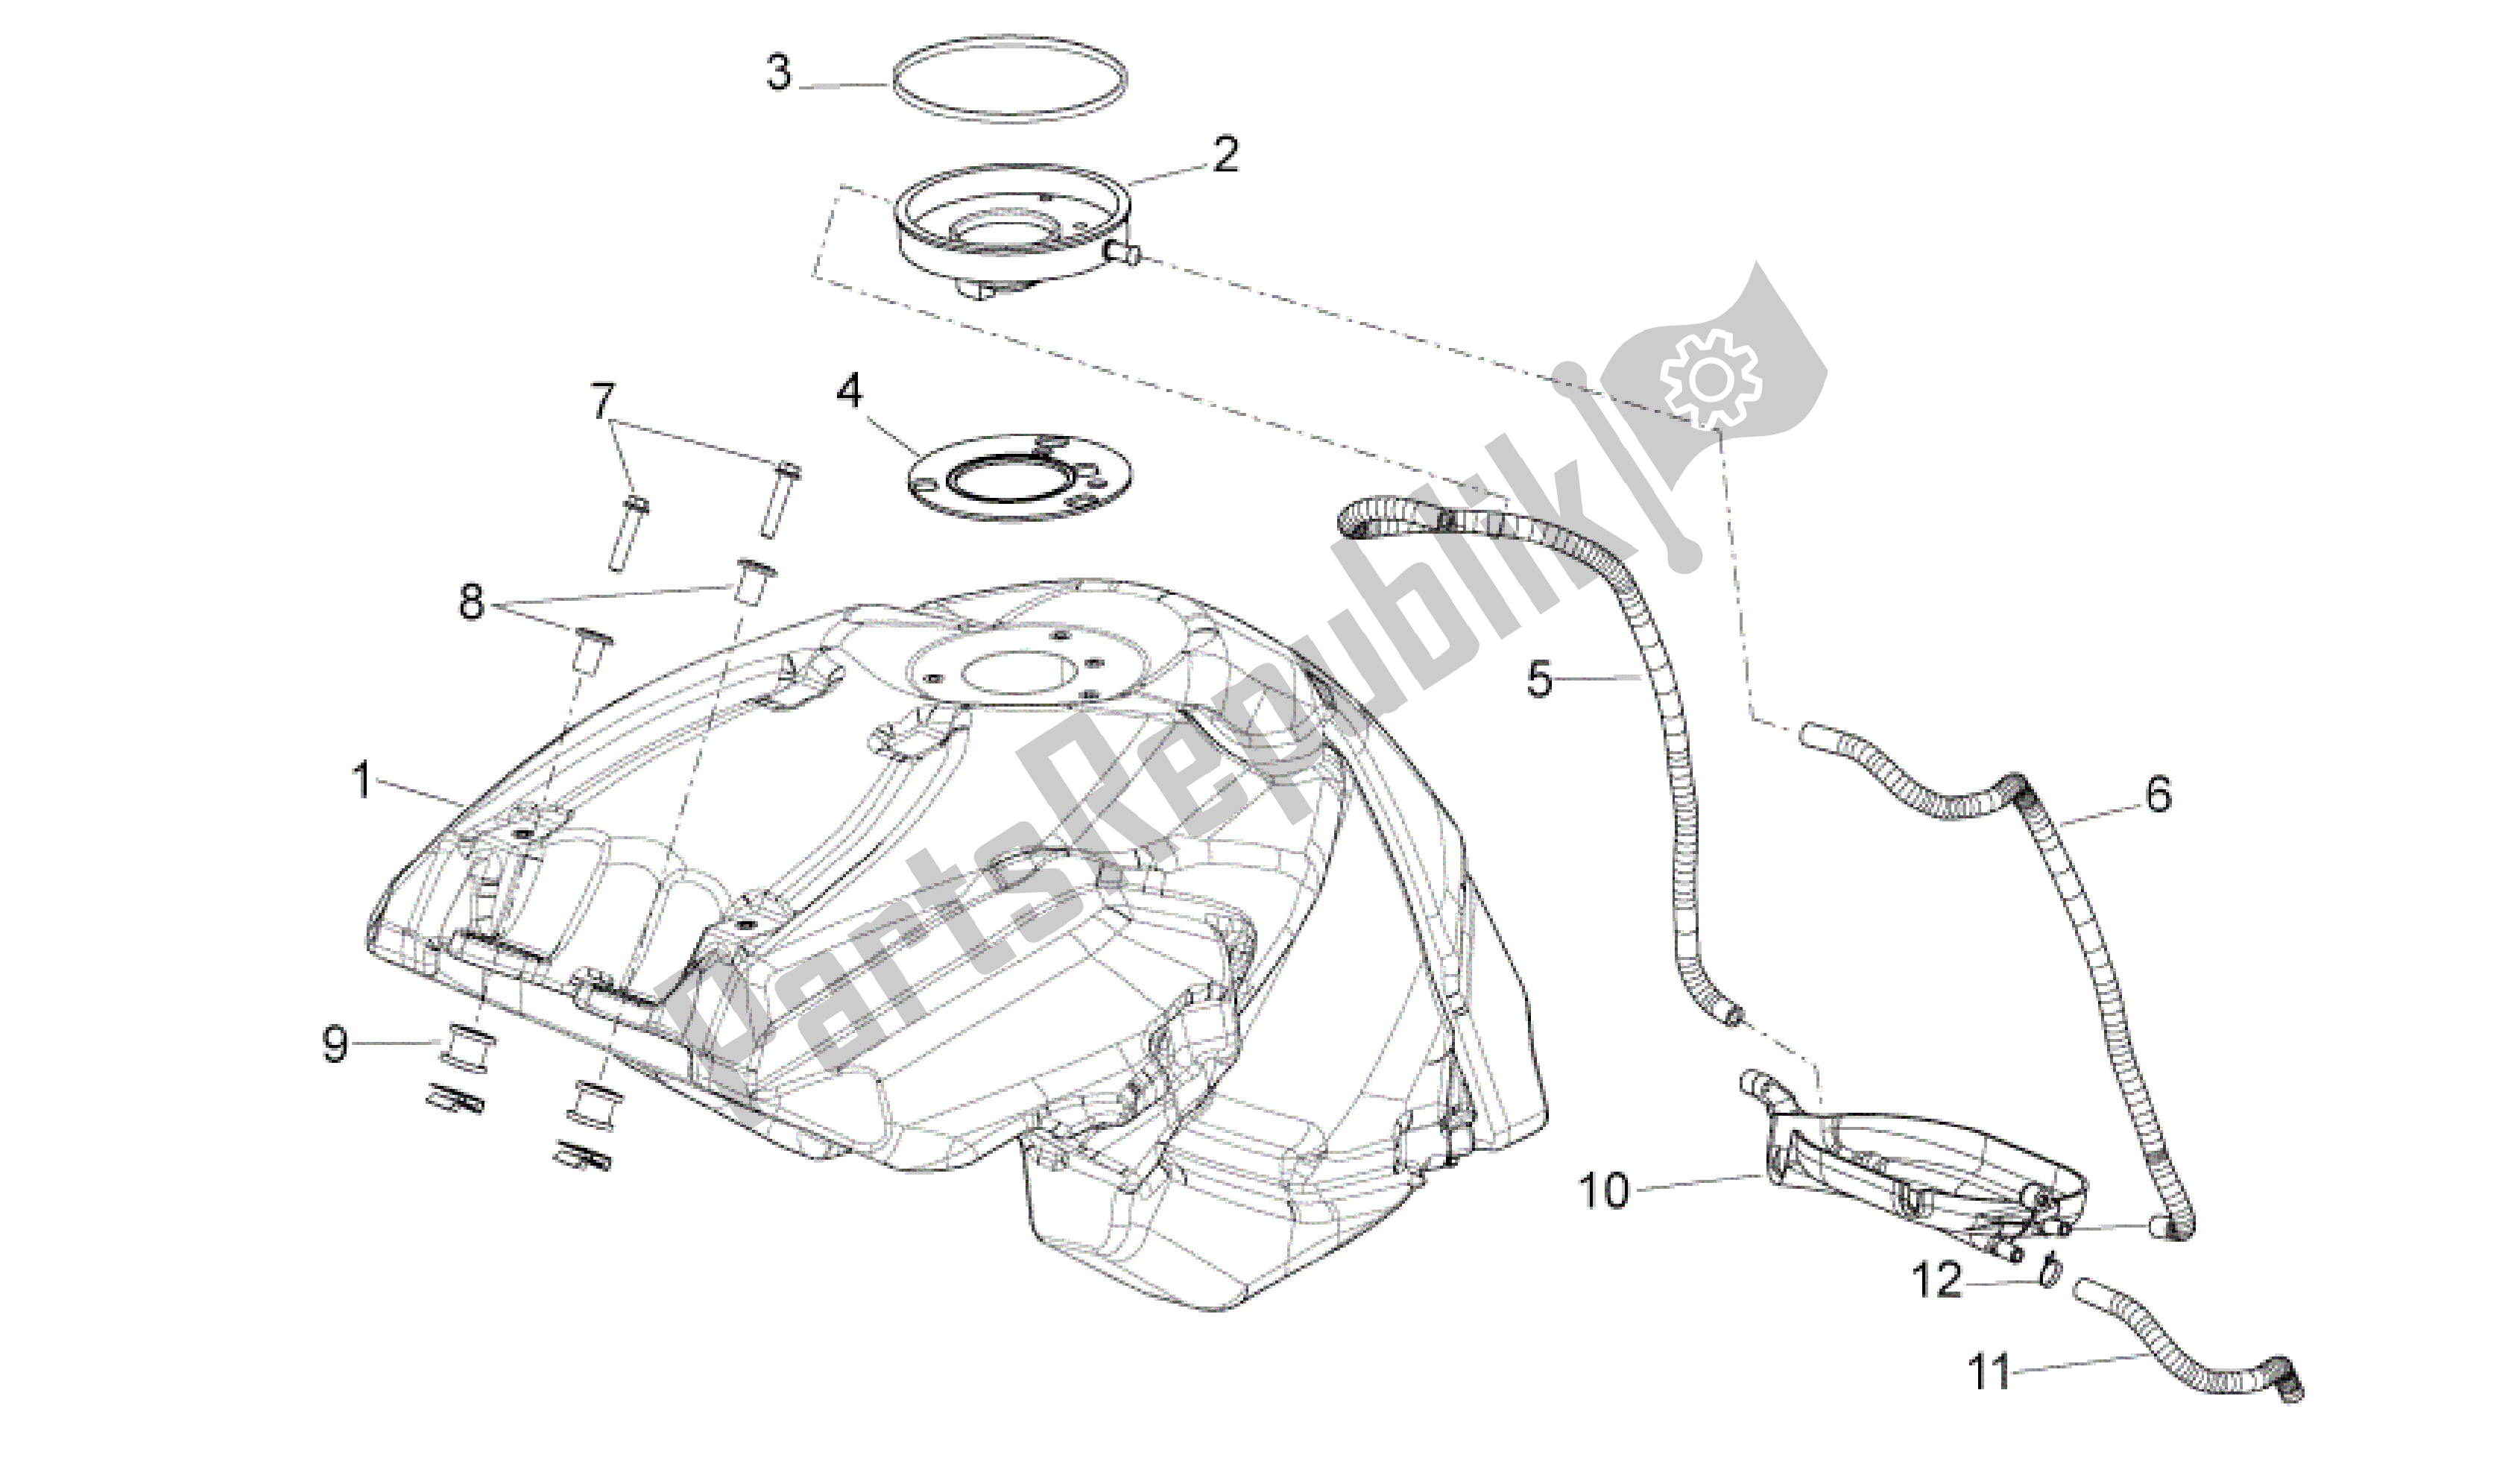 All parts for the Fuel Tank of the Aprilia Shiver 750 2007 - 2009